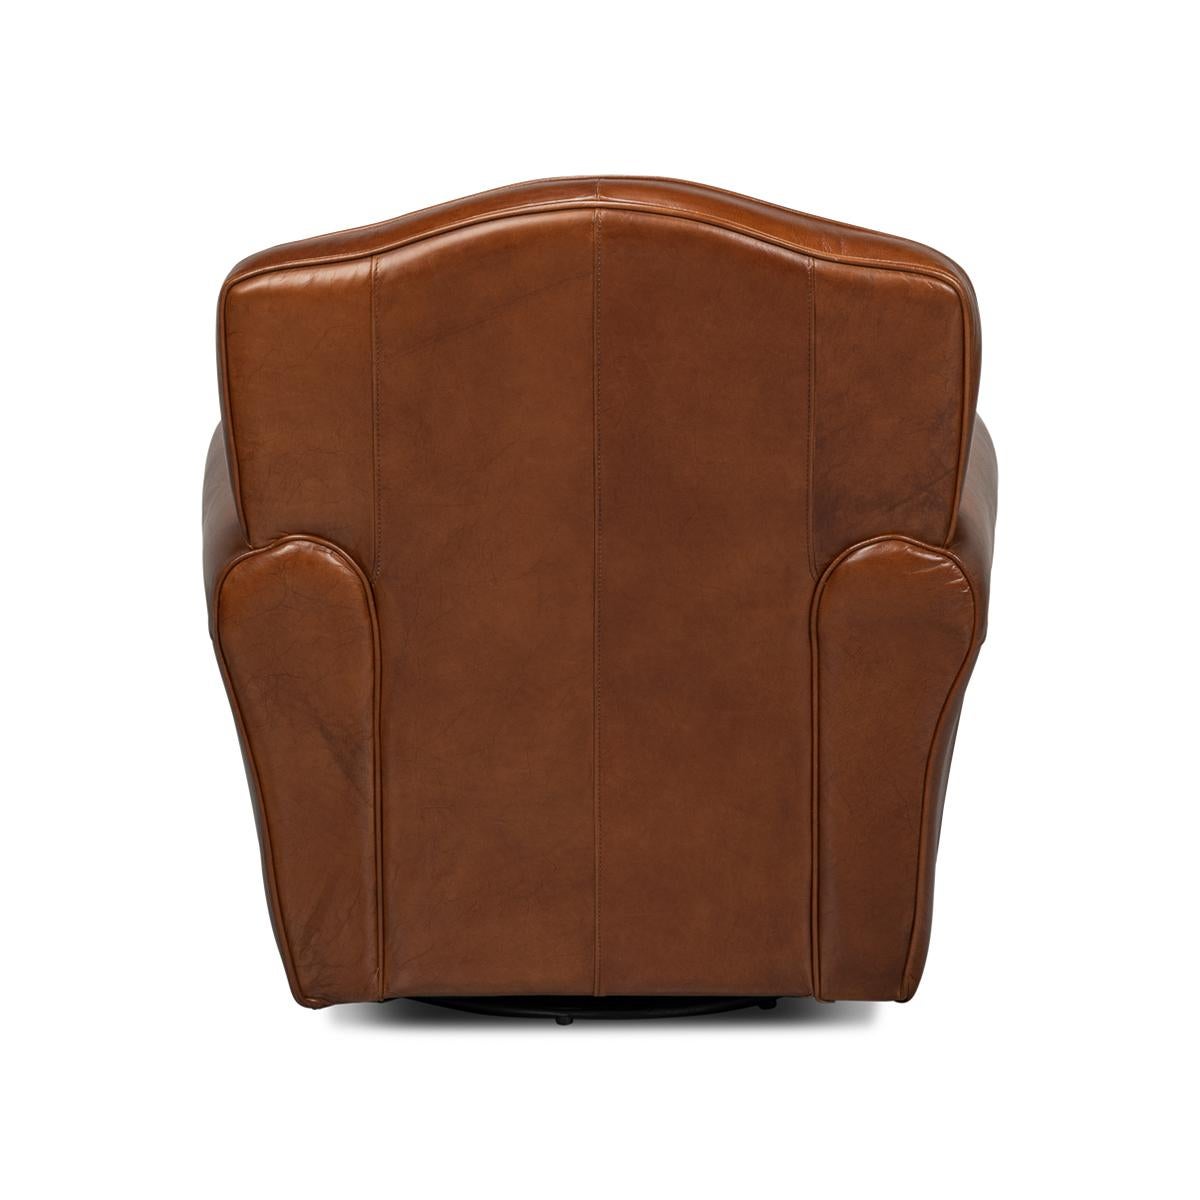 Asian French Art Deco Style Leather Club Chair For Sale